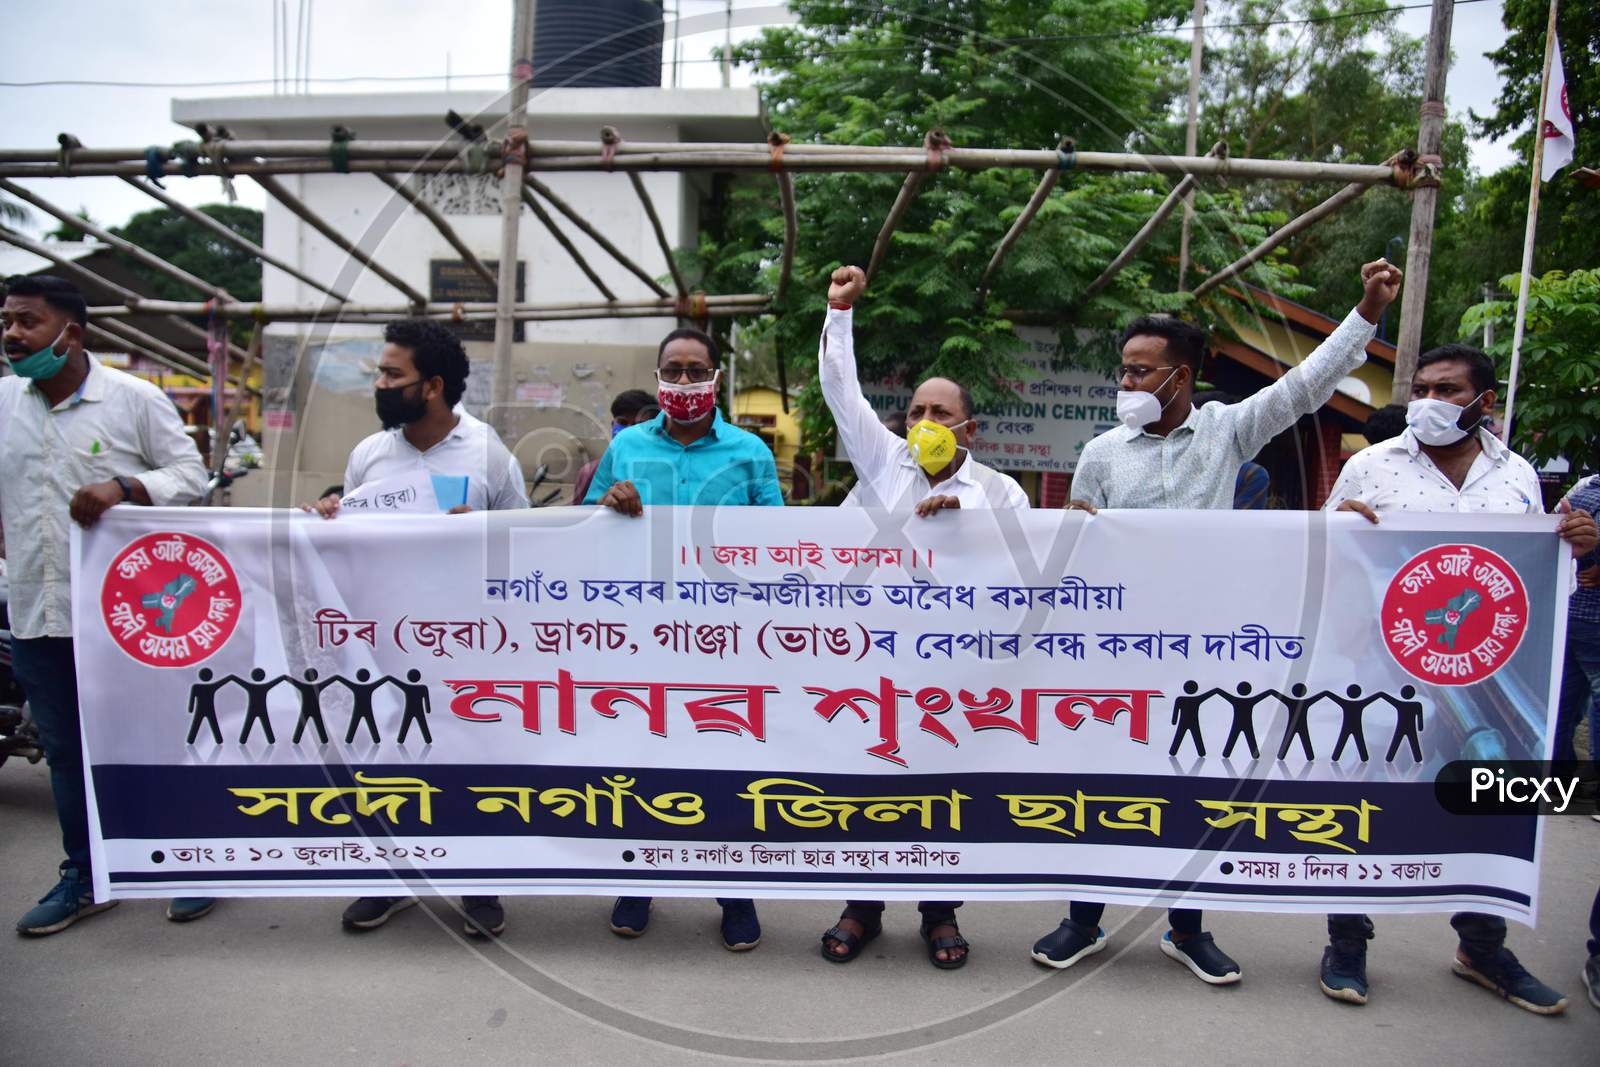 Members of All Assam Students Union(AASU) form a human chain to protest against drugs abuse in Nagaon, Assam on July 10, 2020